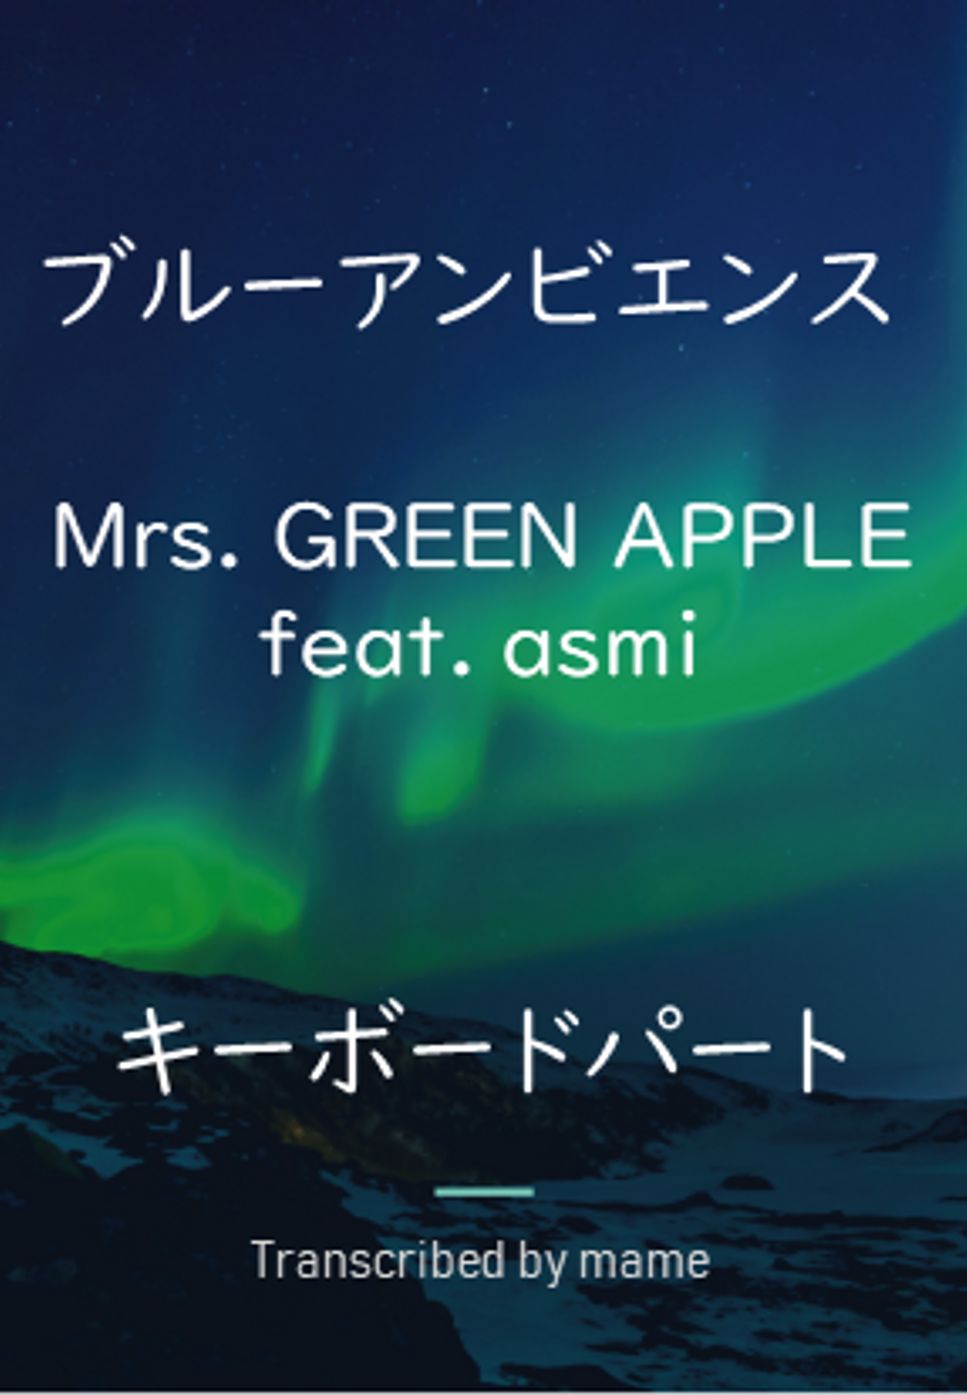 Mrs. GREEN APPLE - ブルーアンビエンス (piano part) by mame